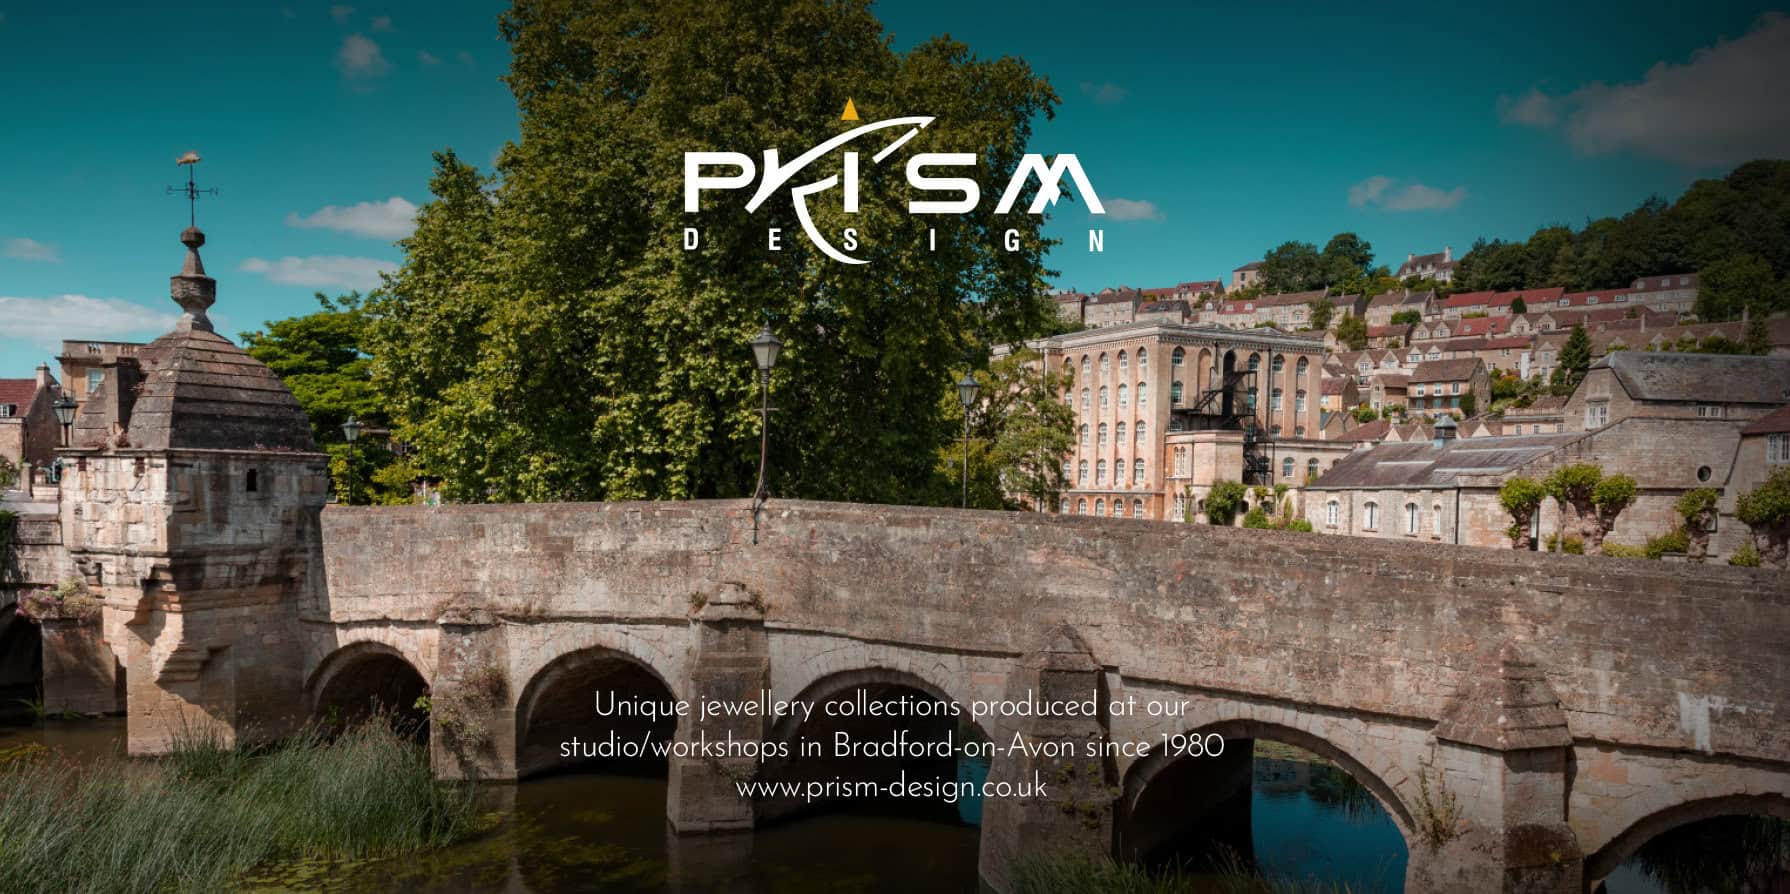 About Prism Jewellery Design